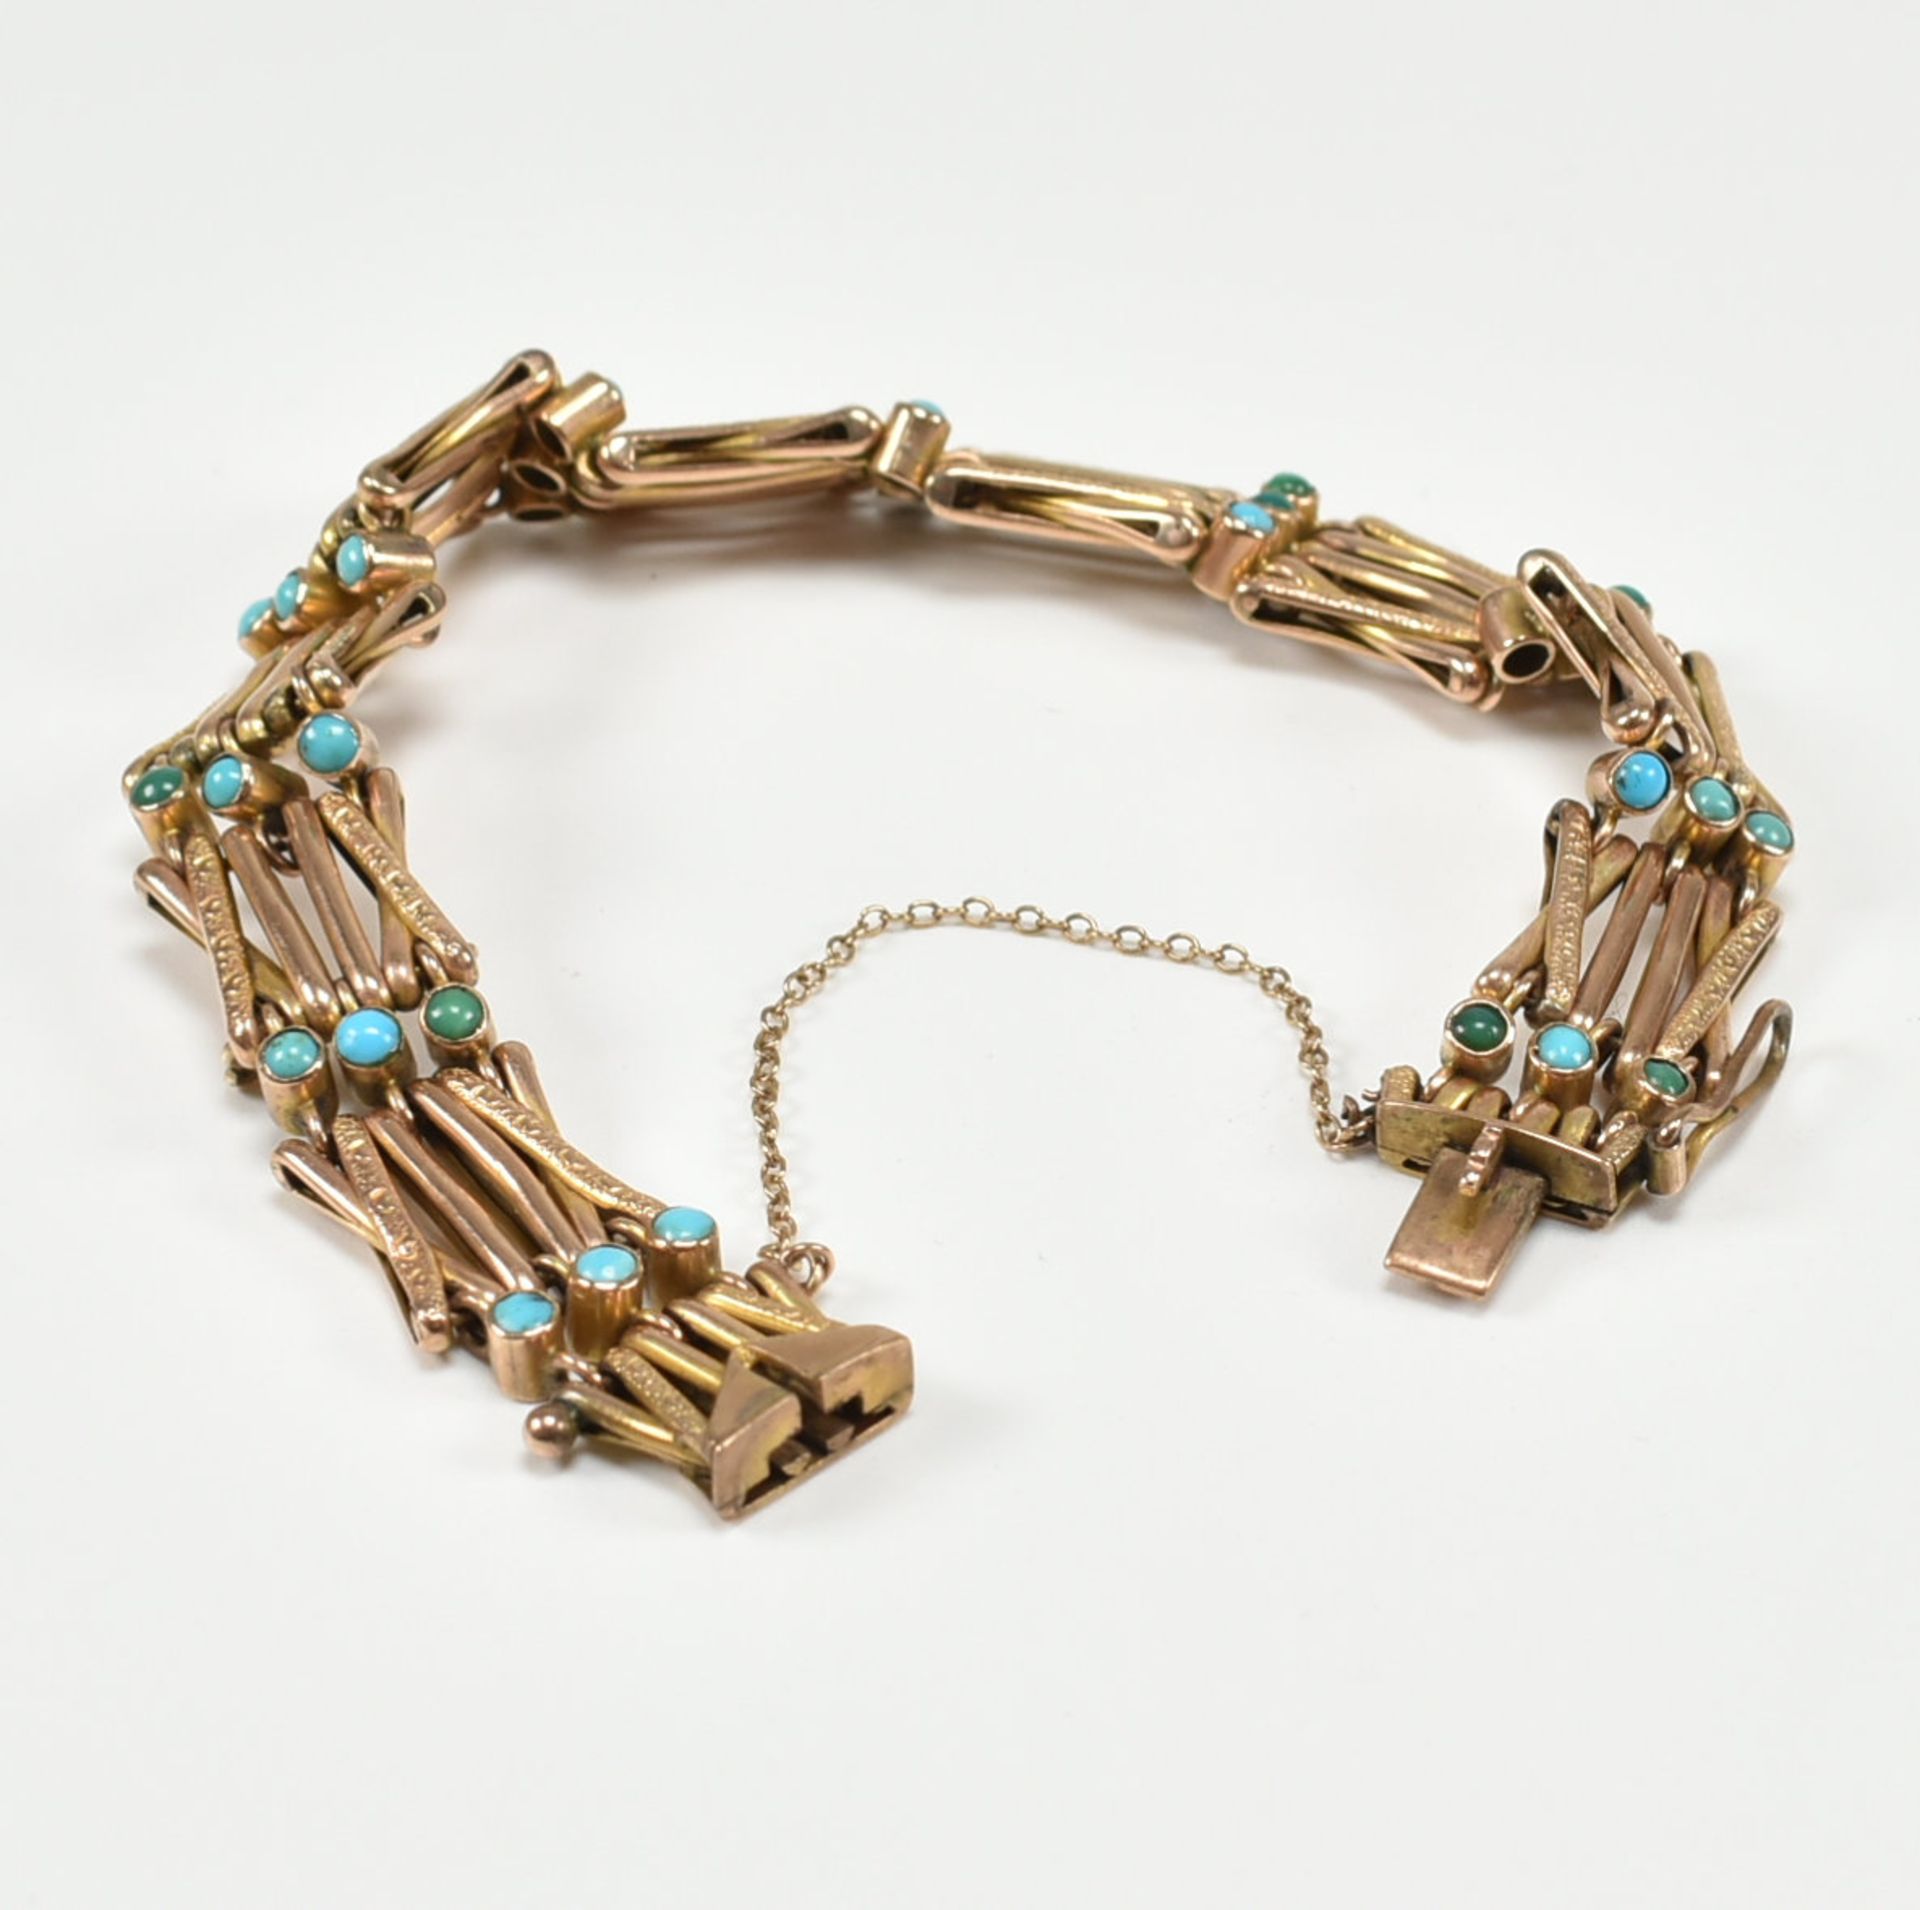 ANTIQUE 9CT GOLD & TURQUOISE BRACELET CHAIN - Image 4 of 5